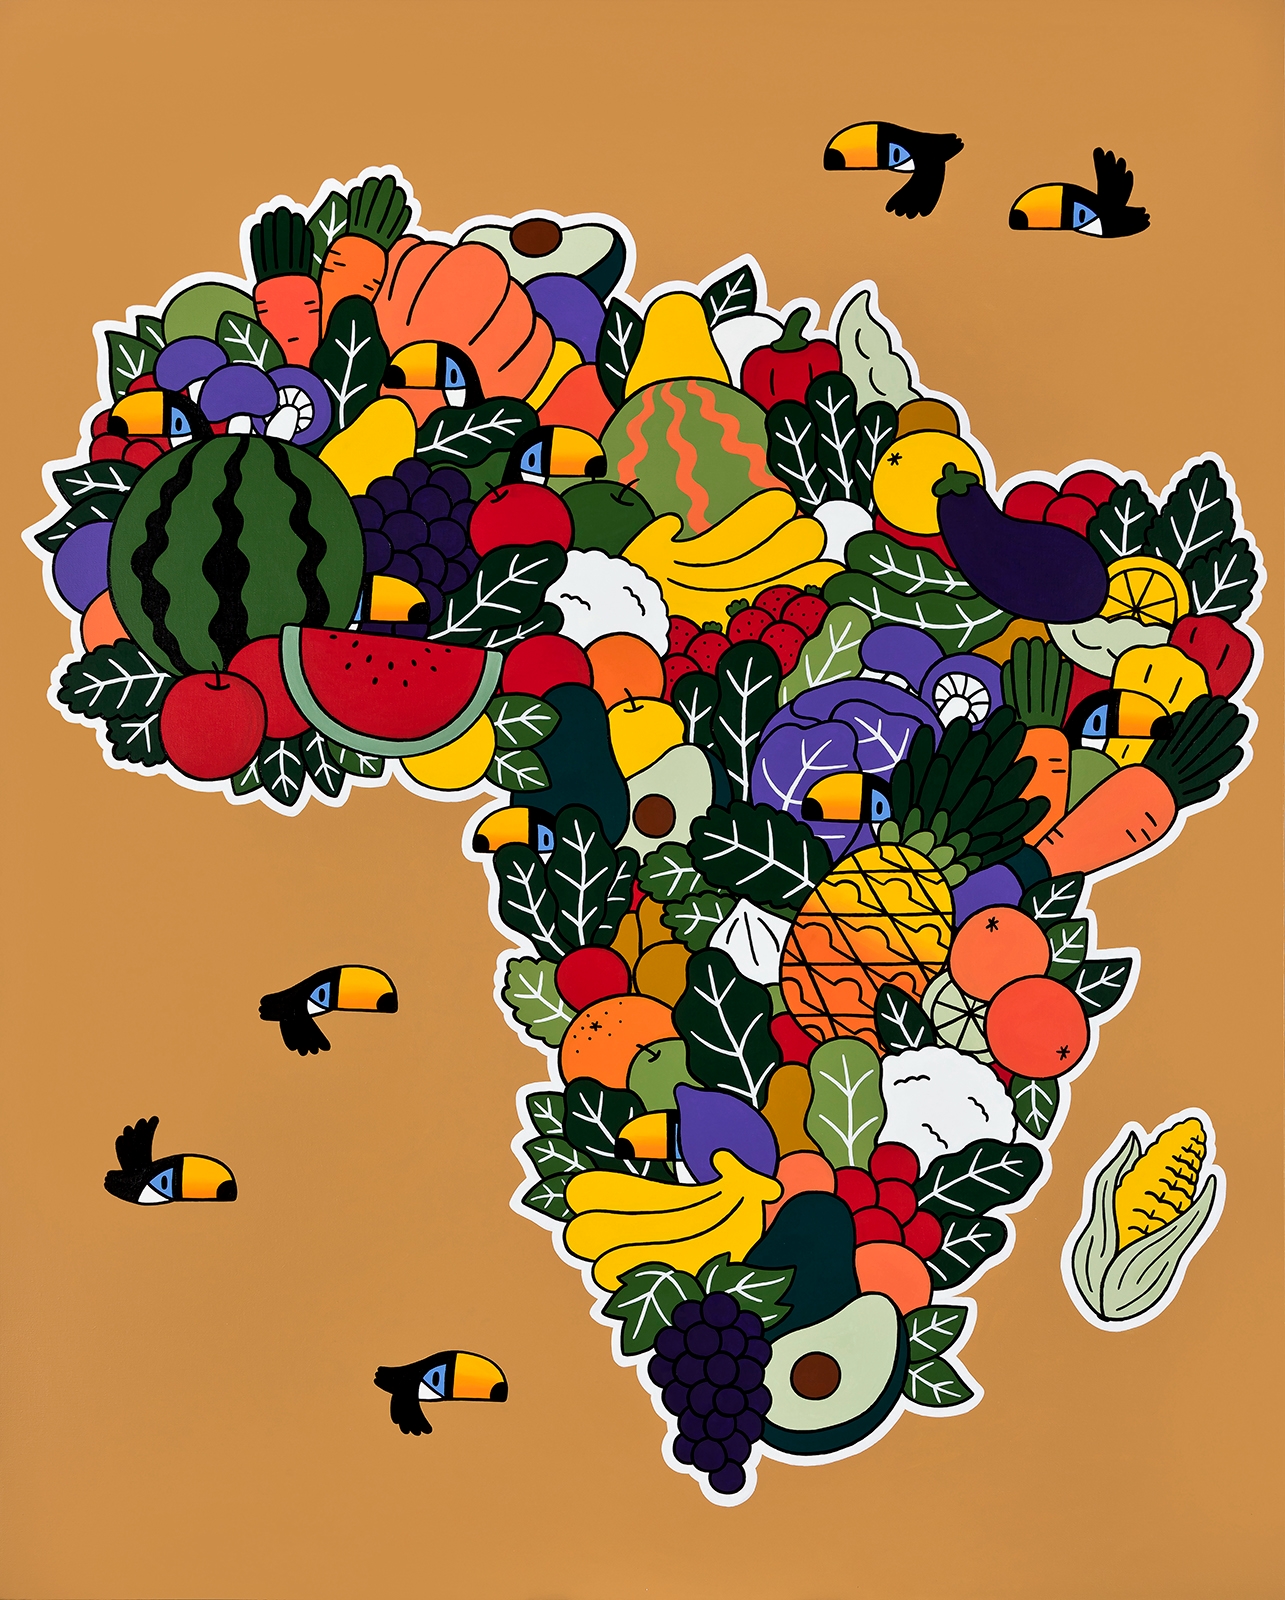 Africa badgeable map by Hyunjinery, 2021